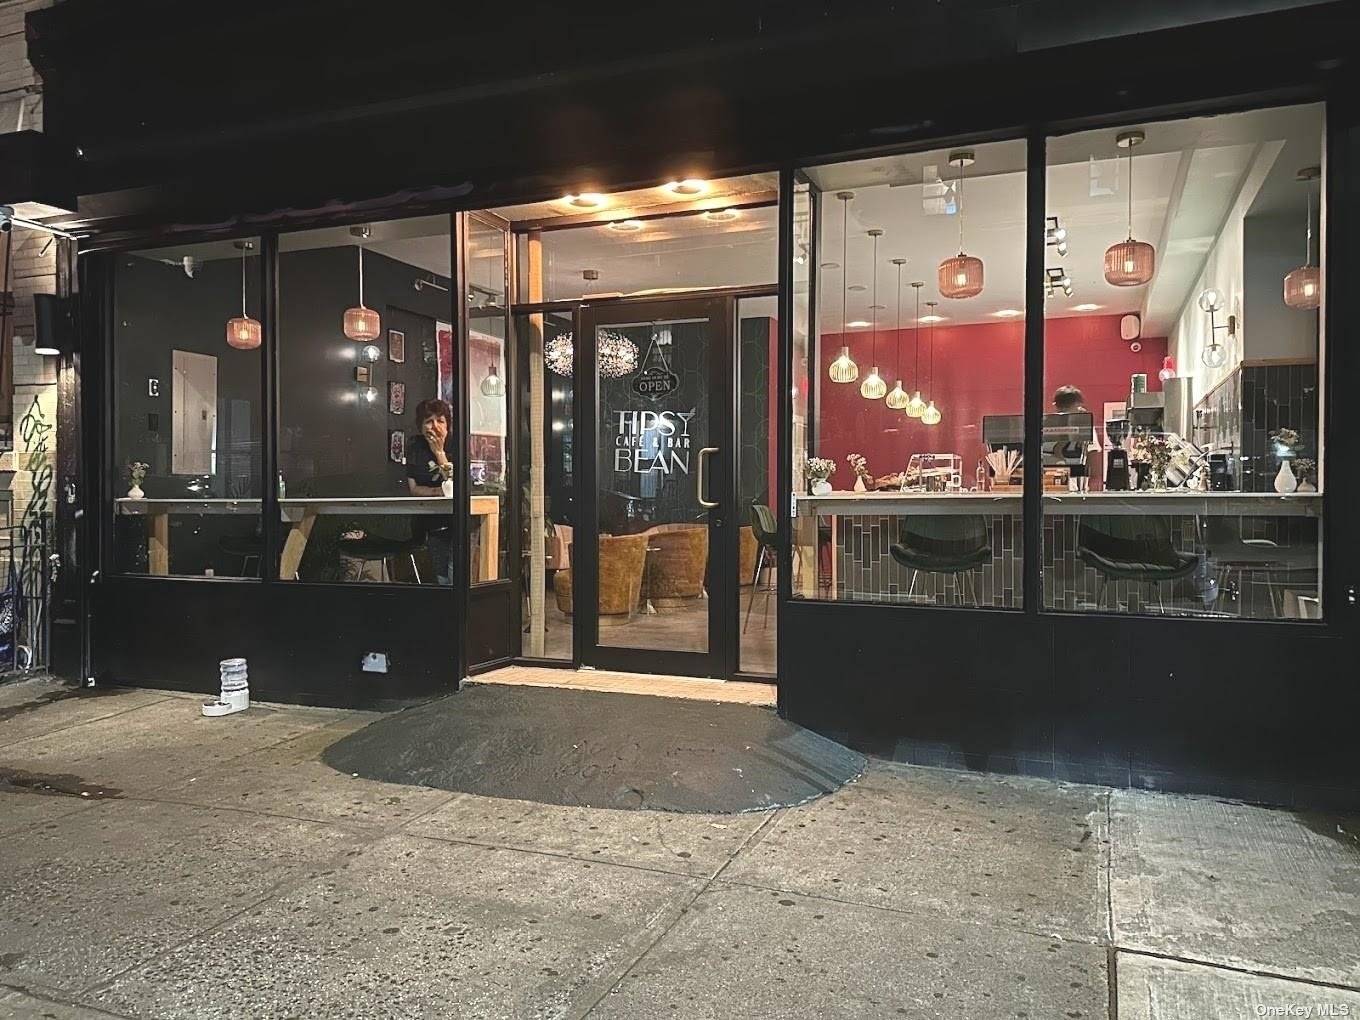 Brand New, Well Set Up Coffee and Bar Business For Sale In The Most Charming and Desirable Location of Bushwick !